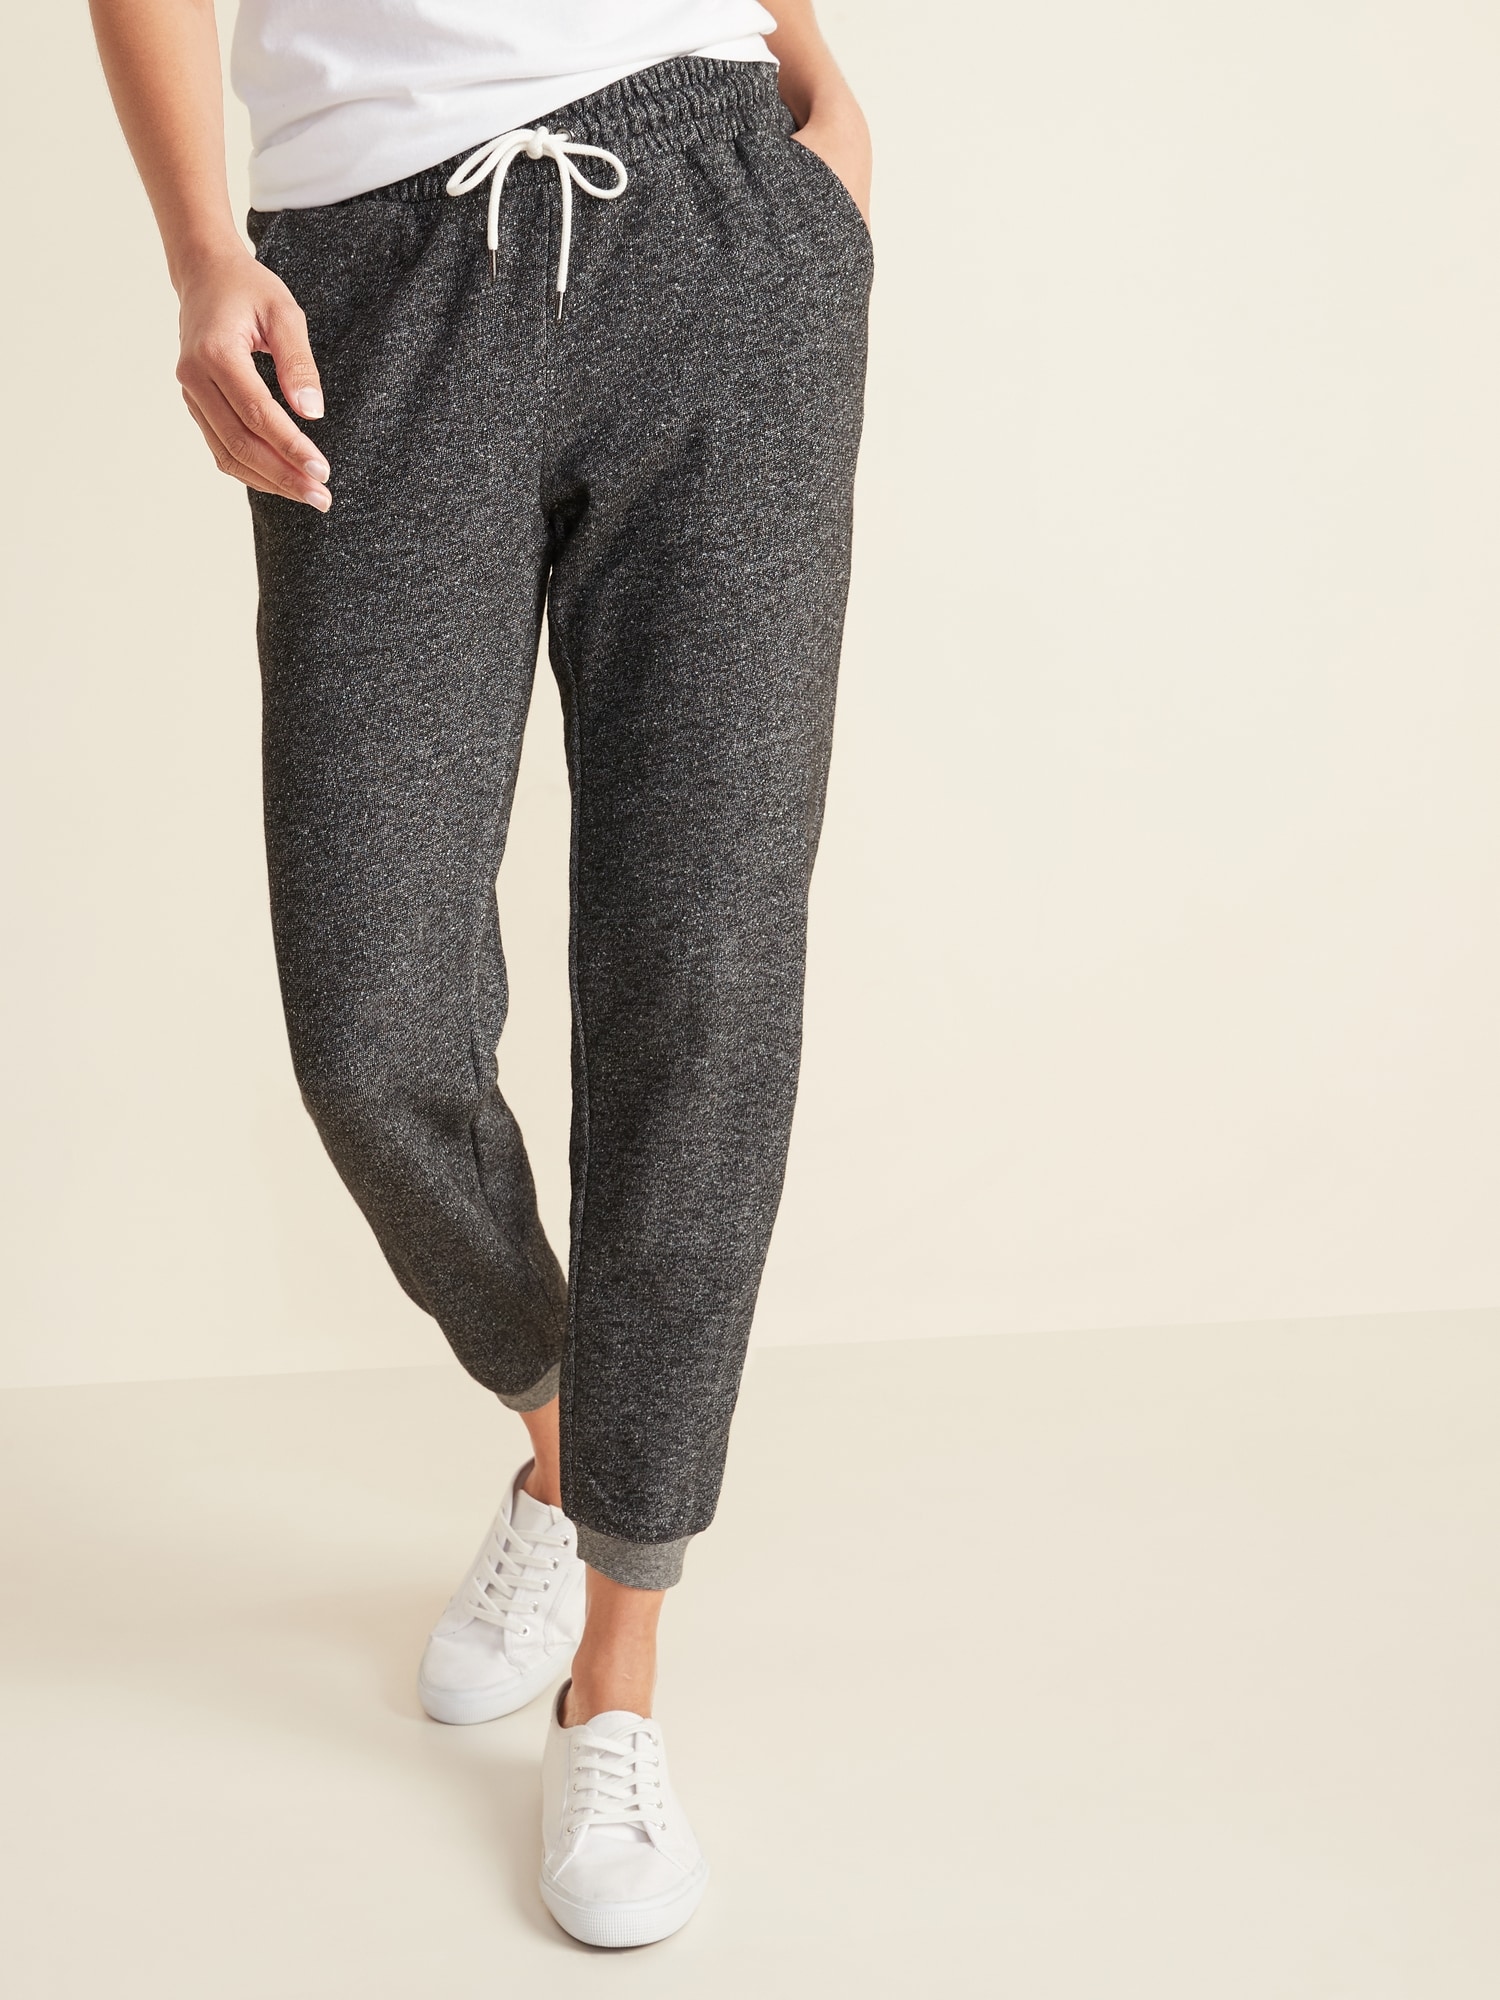 Marled French-Terry Jogger Sweatpants for Women